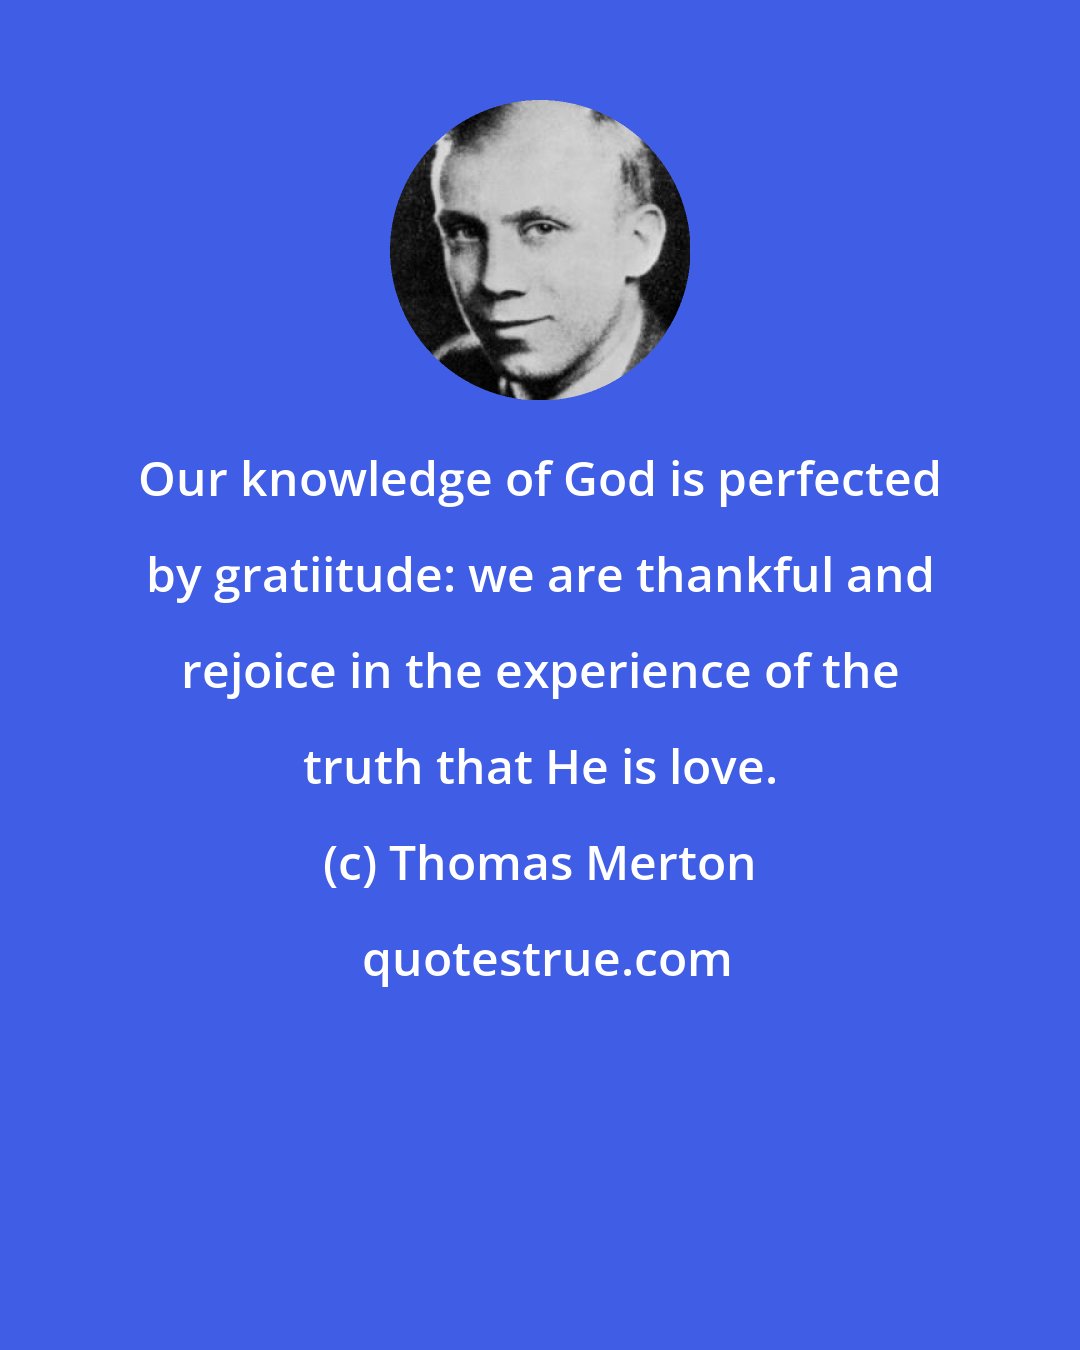 Thomas Merton: Our knowledge of God is perfected by gratiitude: we are thankful and rejoice in the experience of the truth that He is love.